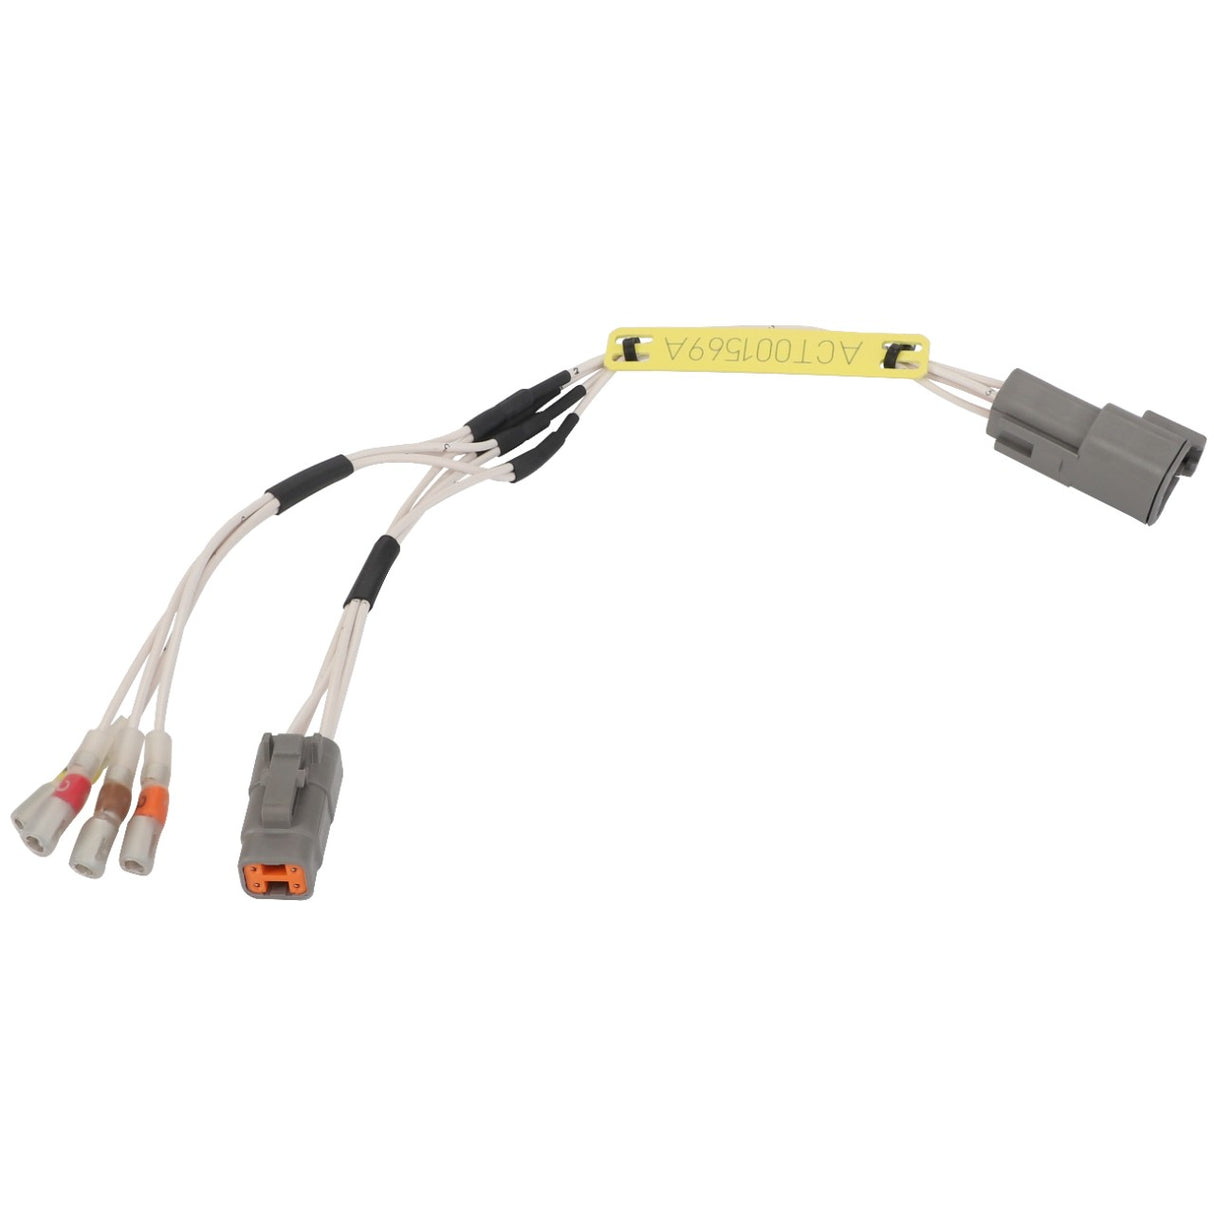 AGCO | Harness - Act001569A - Farming Parts